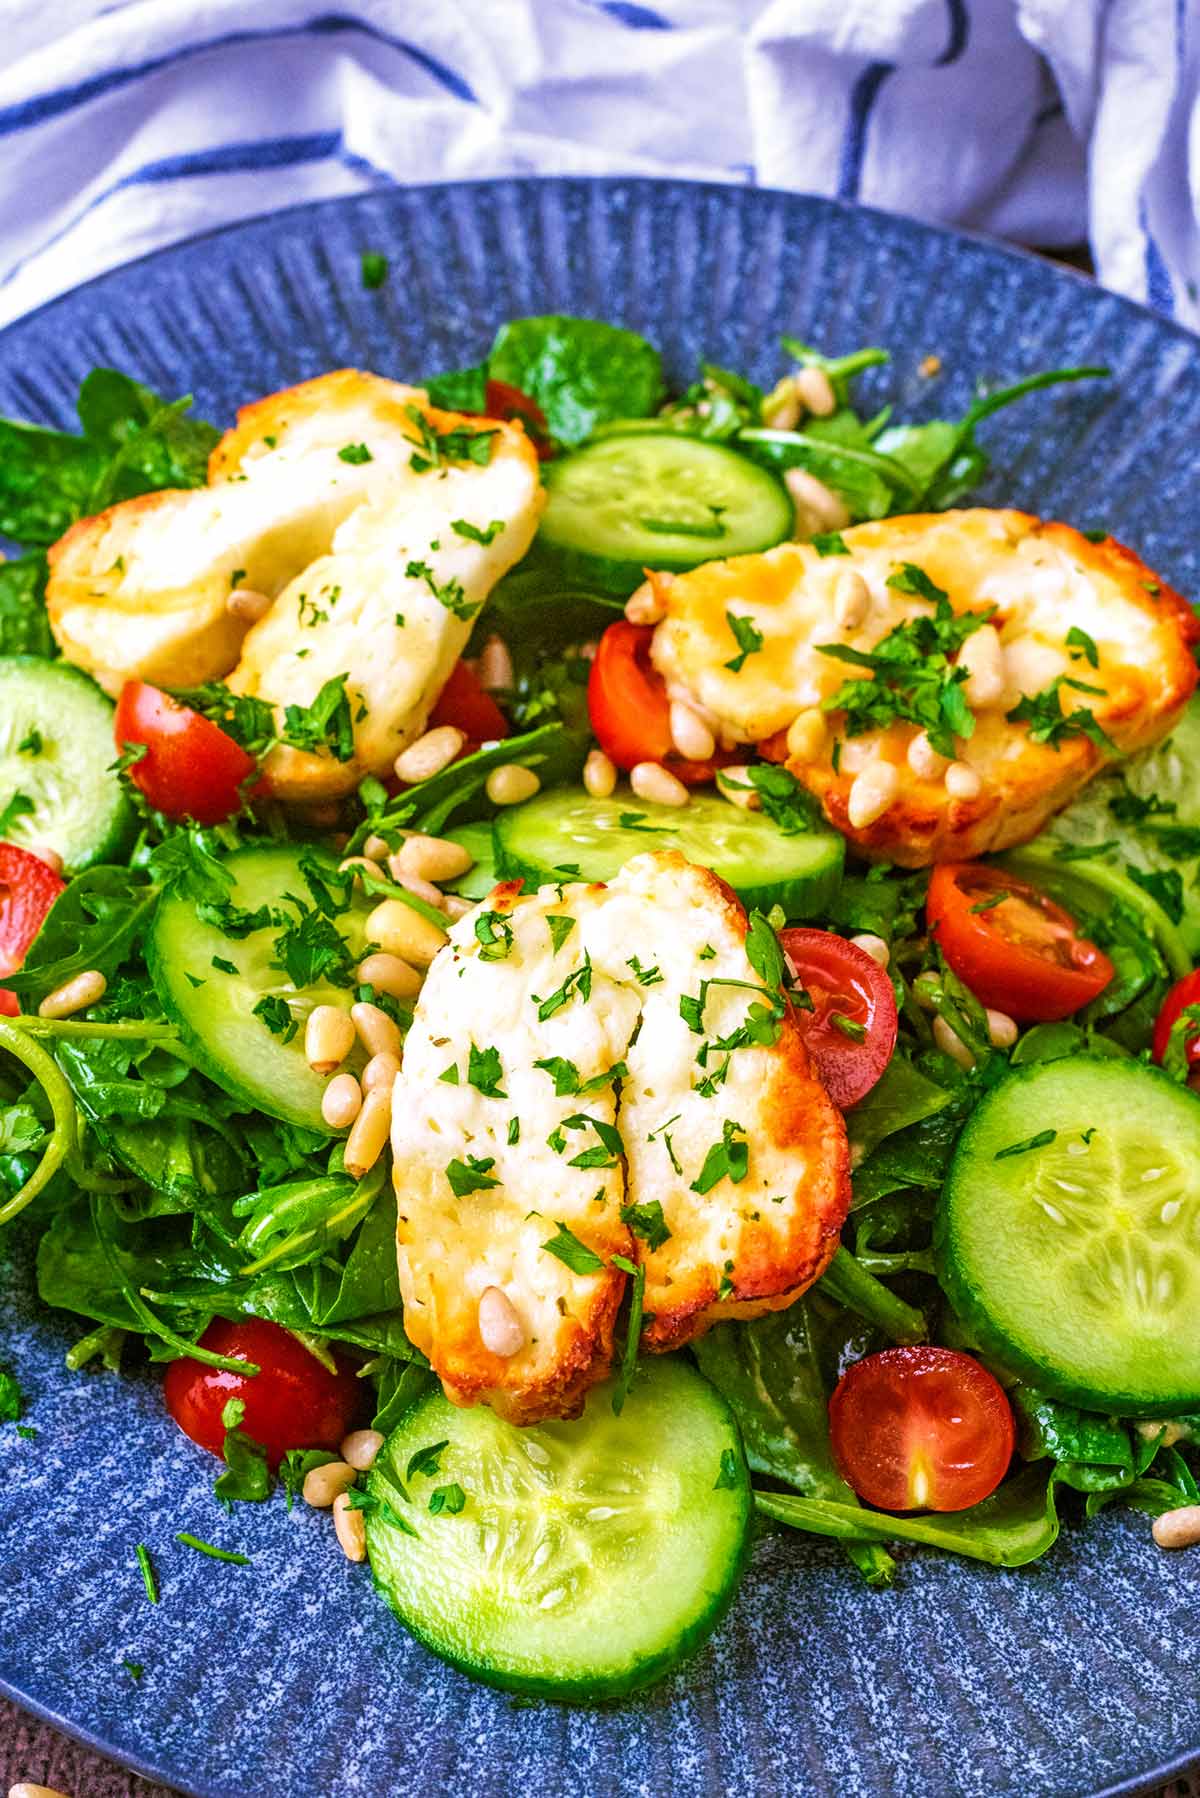 A salad topped with slices of cooked halloumi.